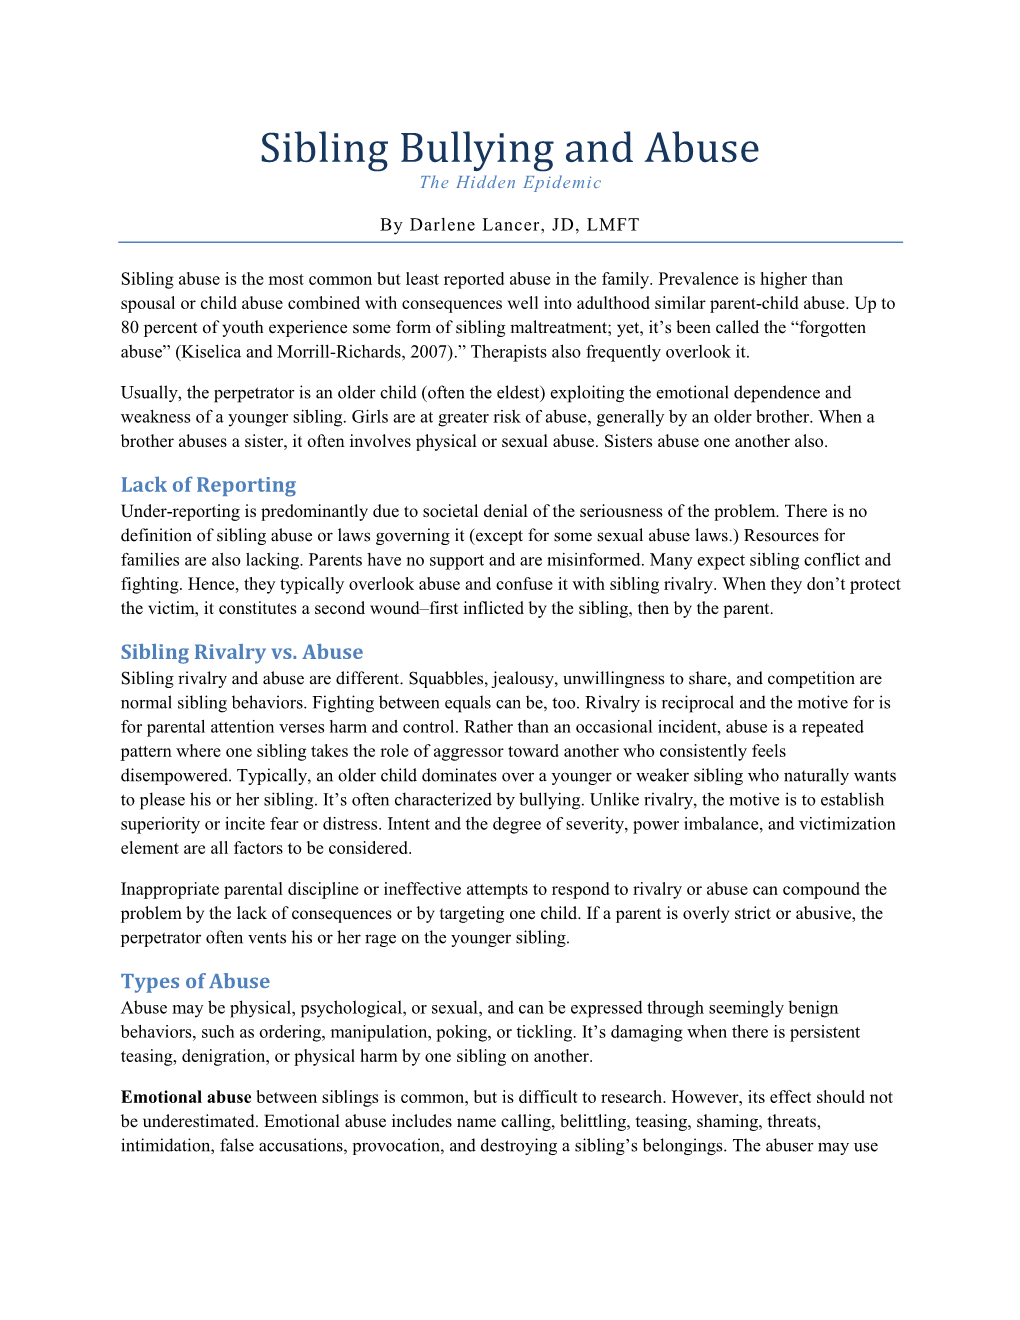 Sibling Bullying and Abuse the Hidden Epidemic